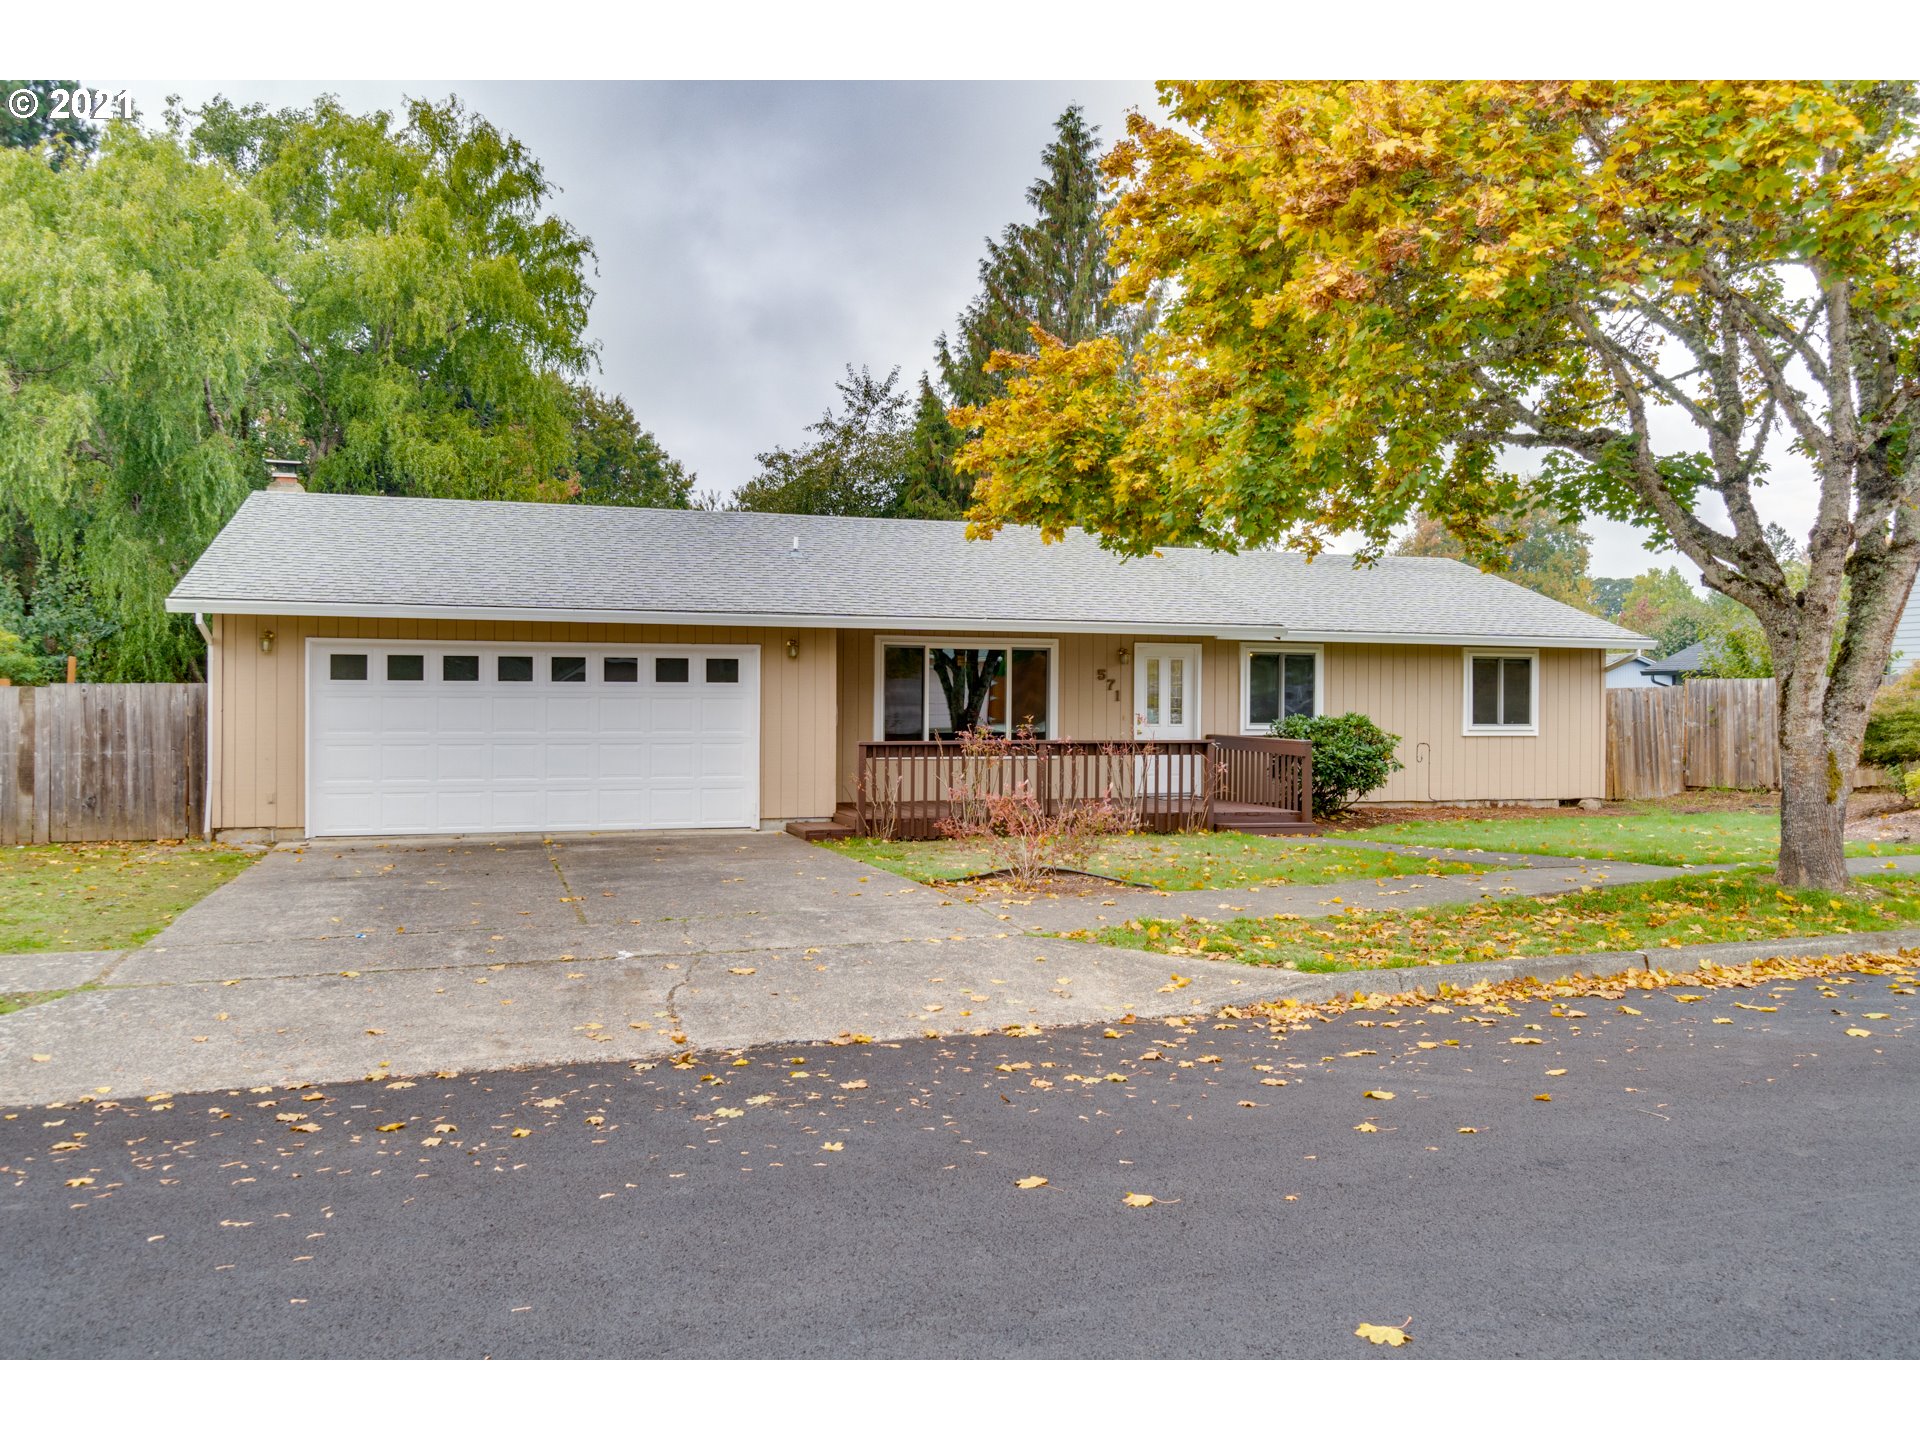 571 S 18TH AVE (1 of 25)